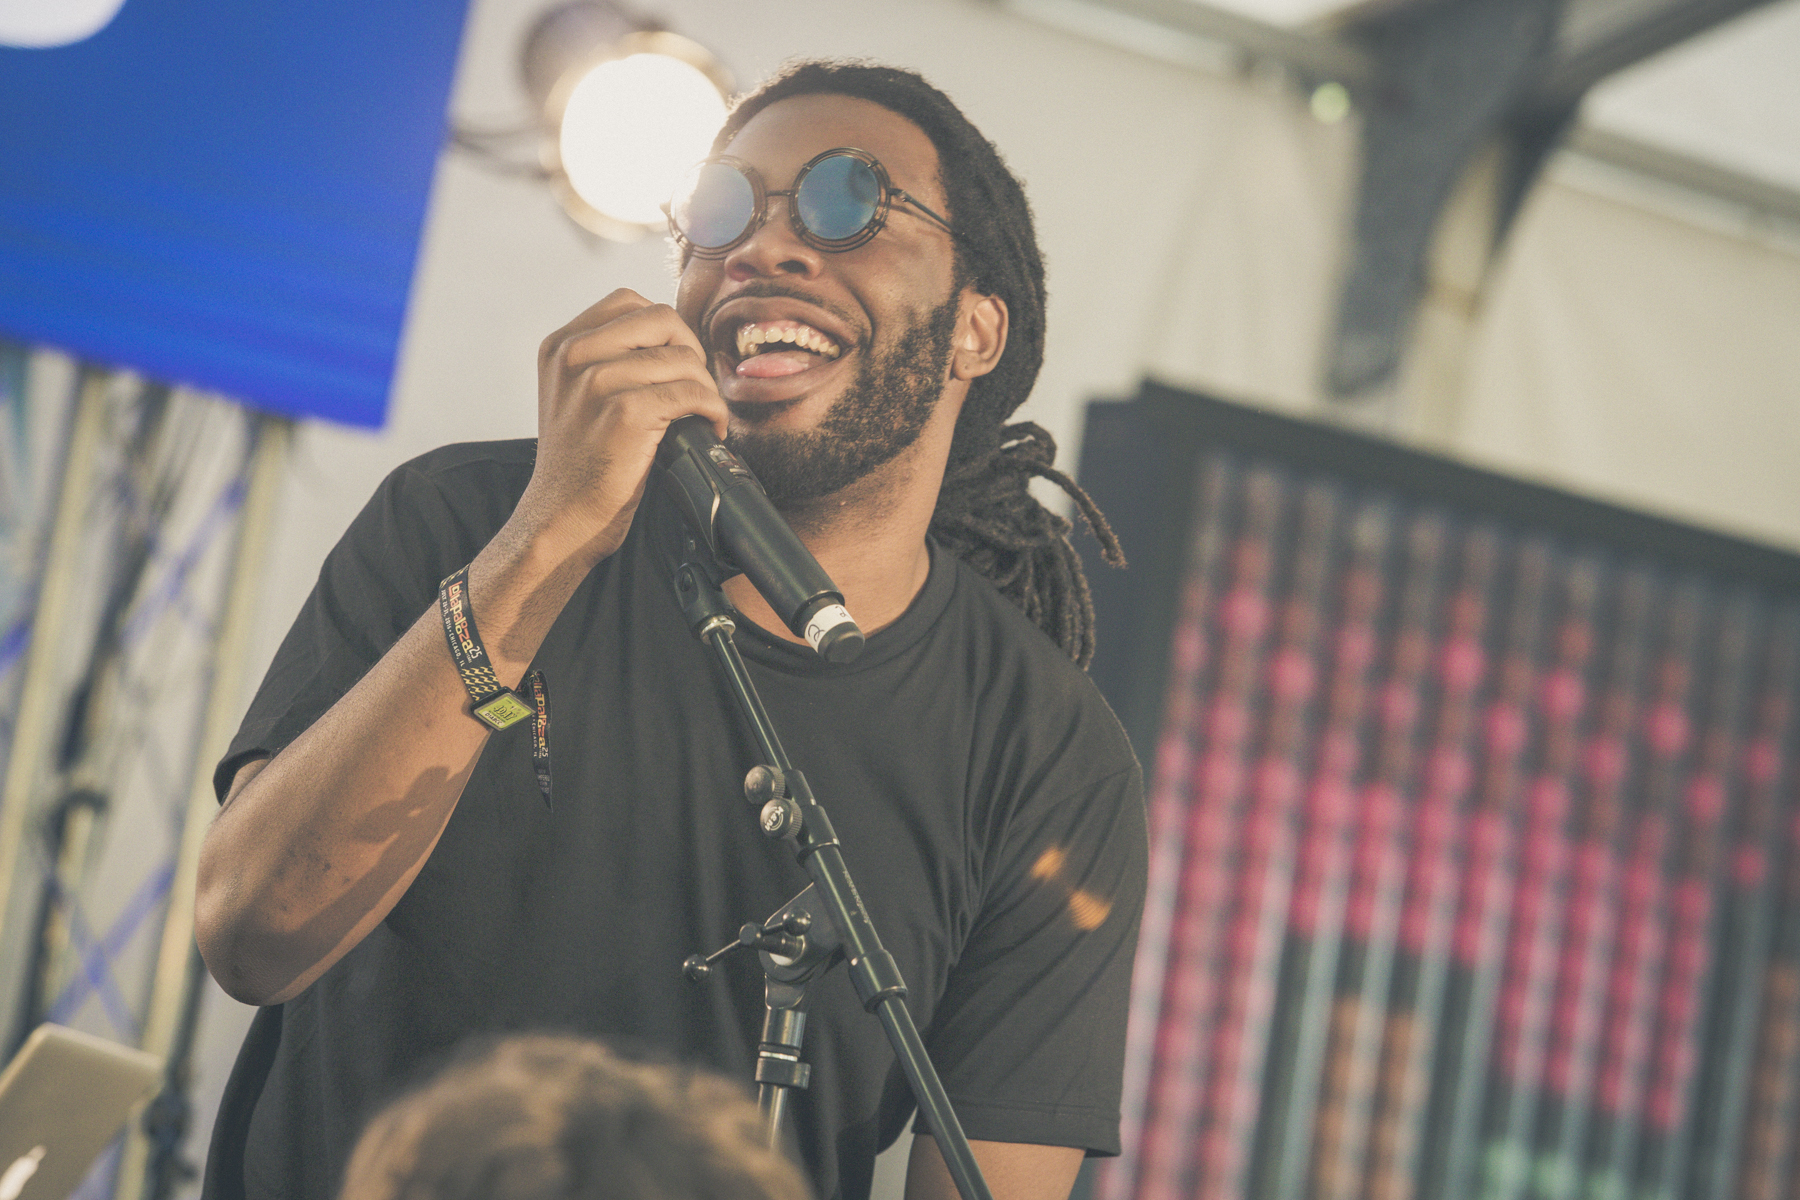 SPIN at Lollapalooza 2016: Day 4 at Toyota Music Den with D.R.A.M, Dua Lipa, and More